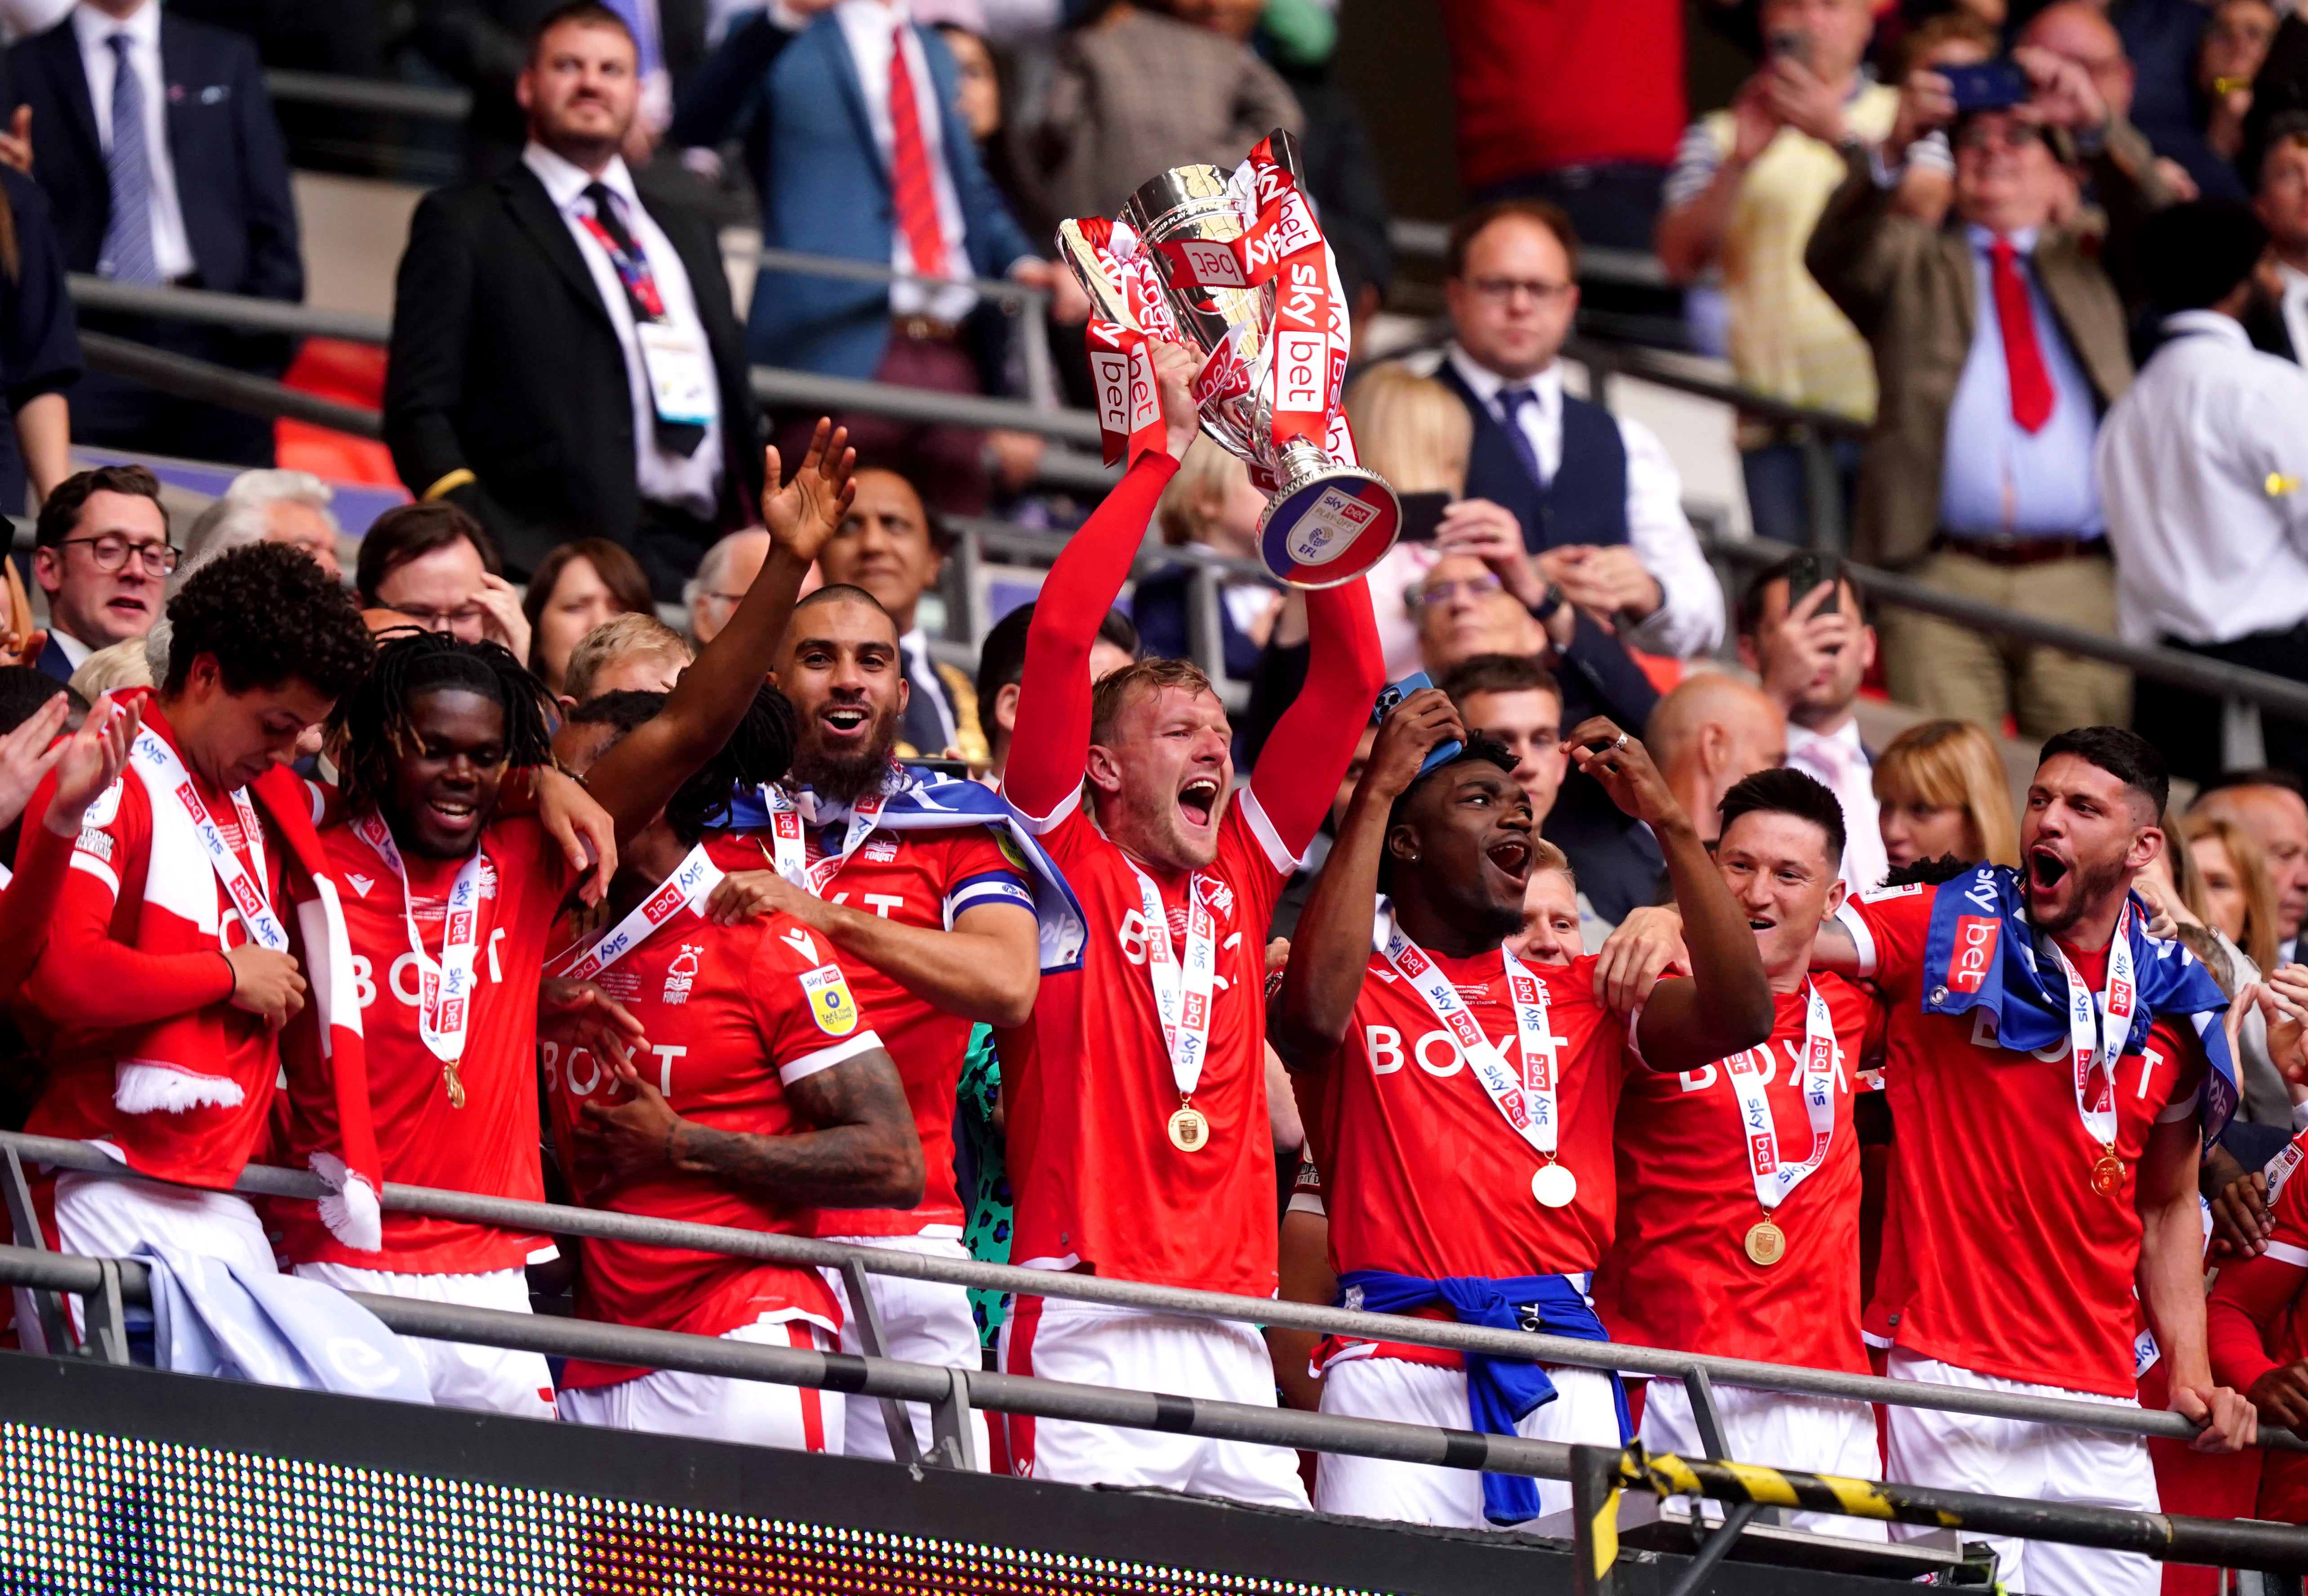 Nottingham Forest skipper Joe Worrall, centre, lifts the Sky Bet Championship play-off final trophy at Wembley (Mike Egerton/PA)